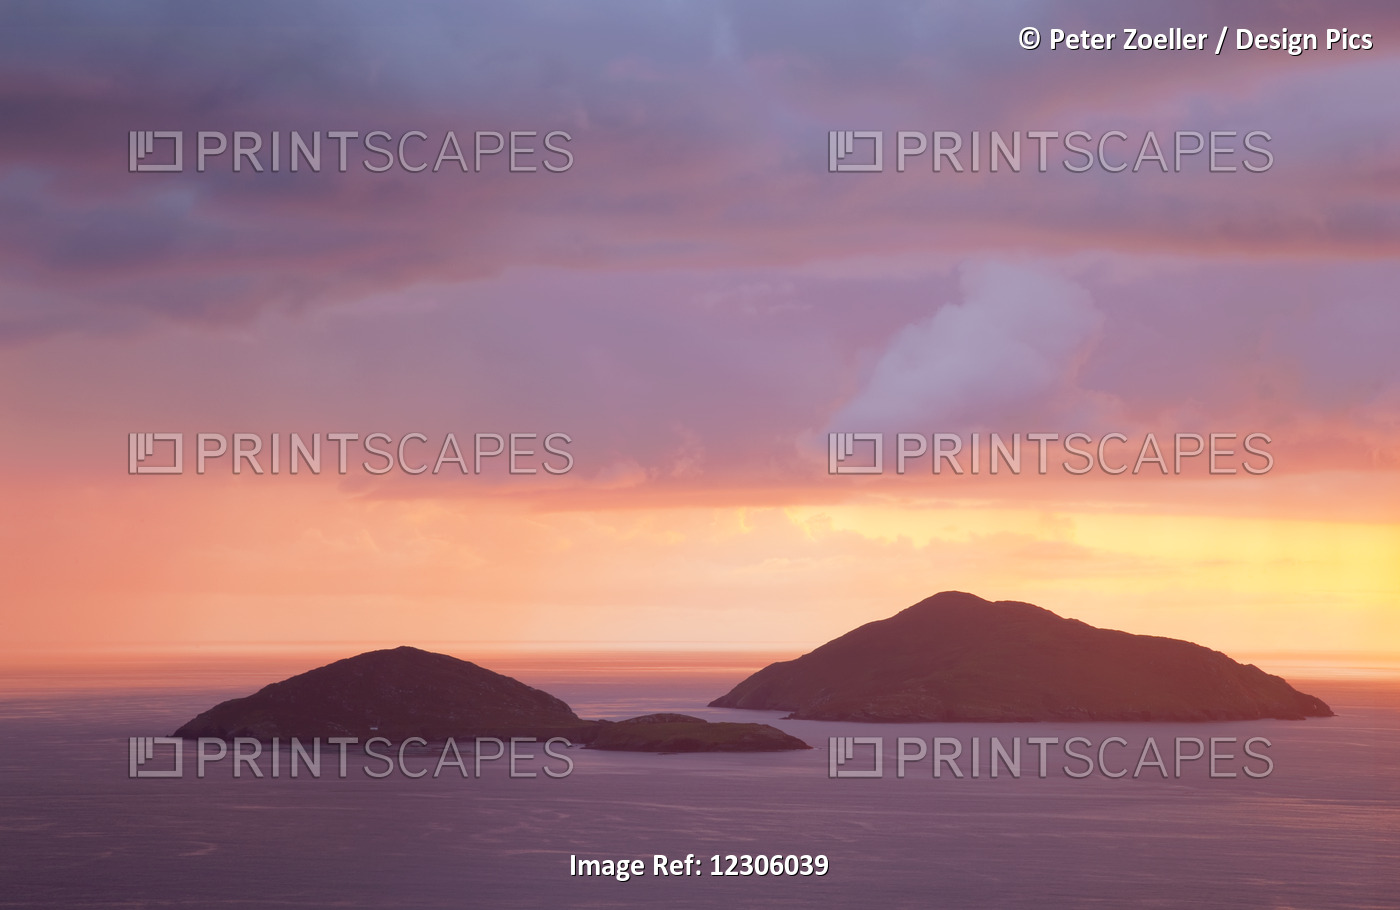 Small Islands Out In The Ocean With A Dramatic Colourful Sky At Sunset; ...